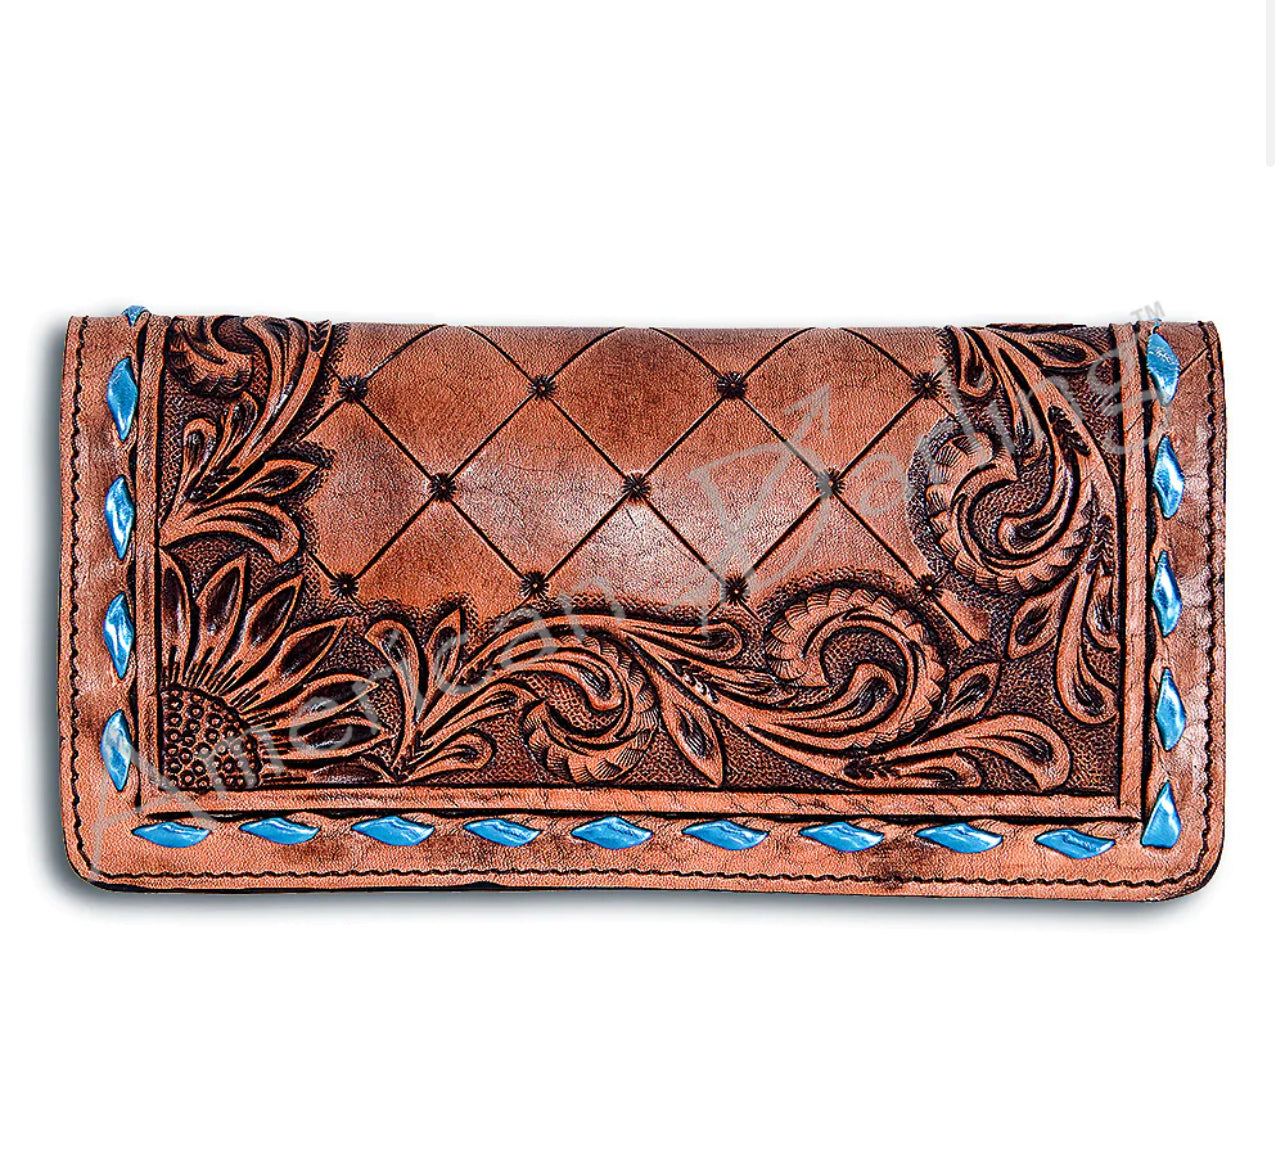 Sunflower Stitched Leather Wallet